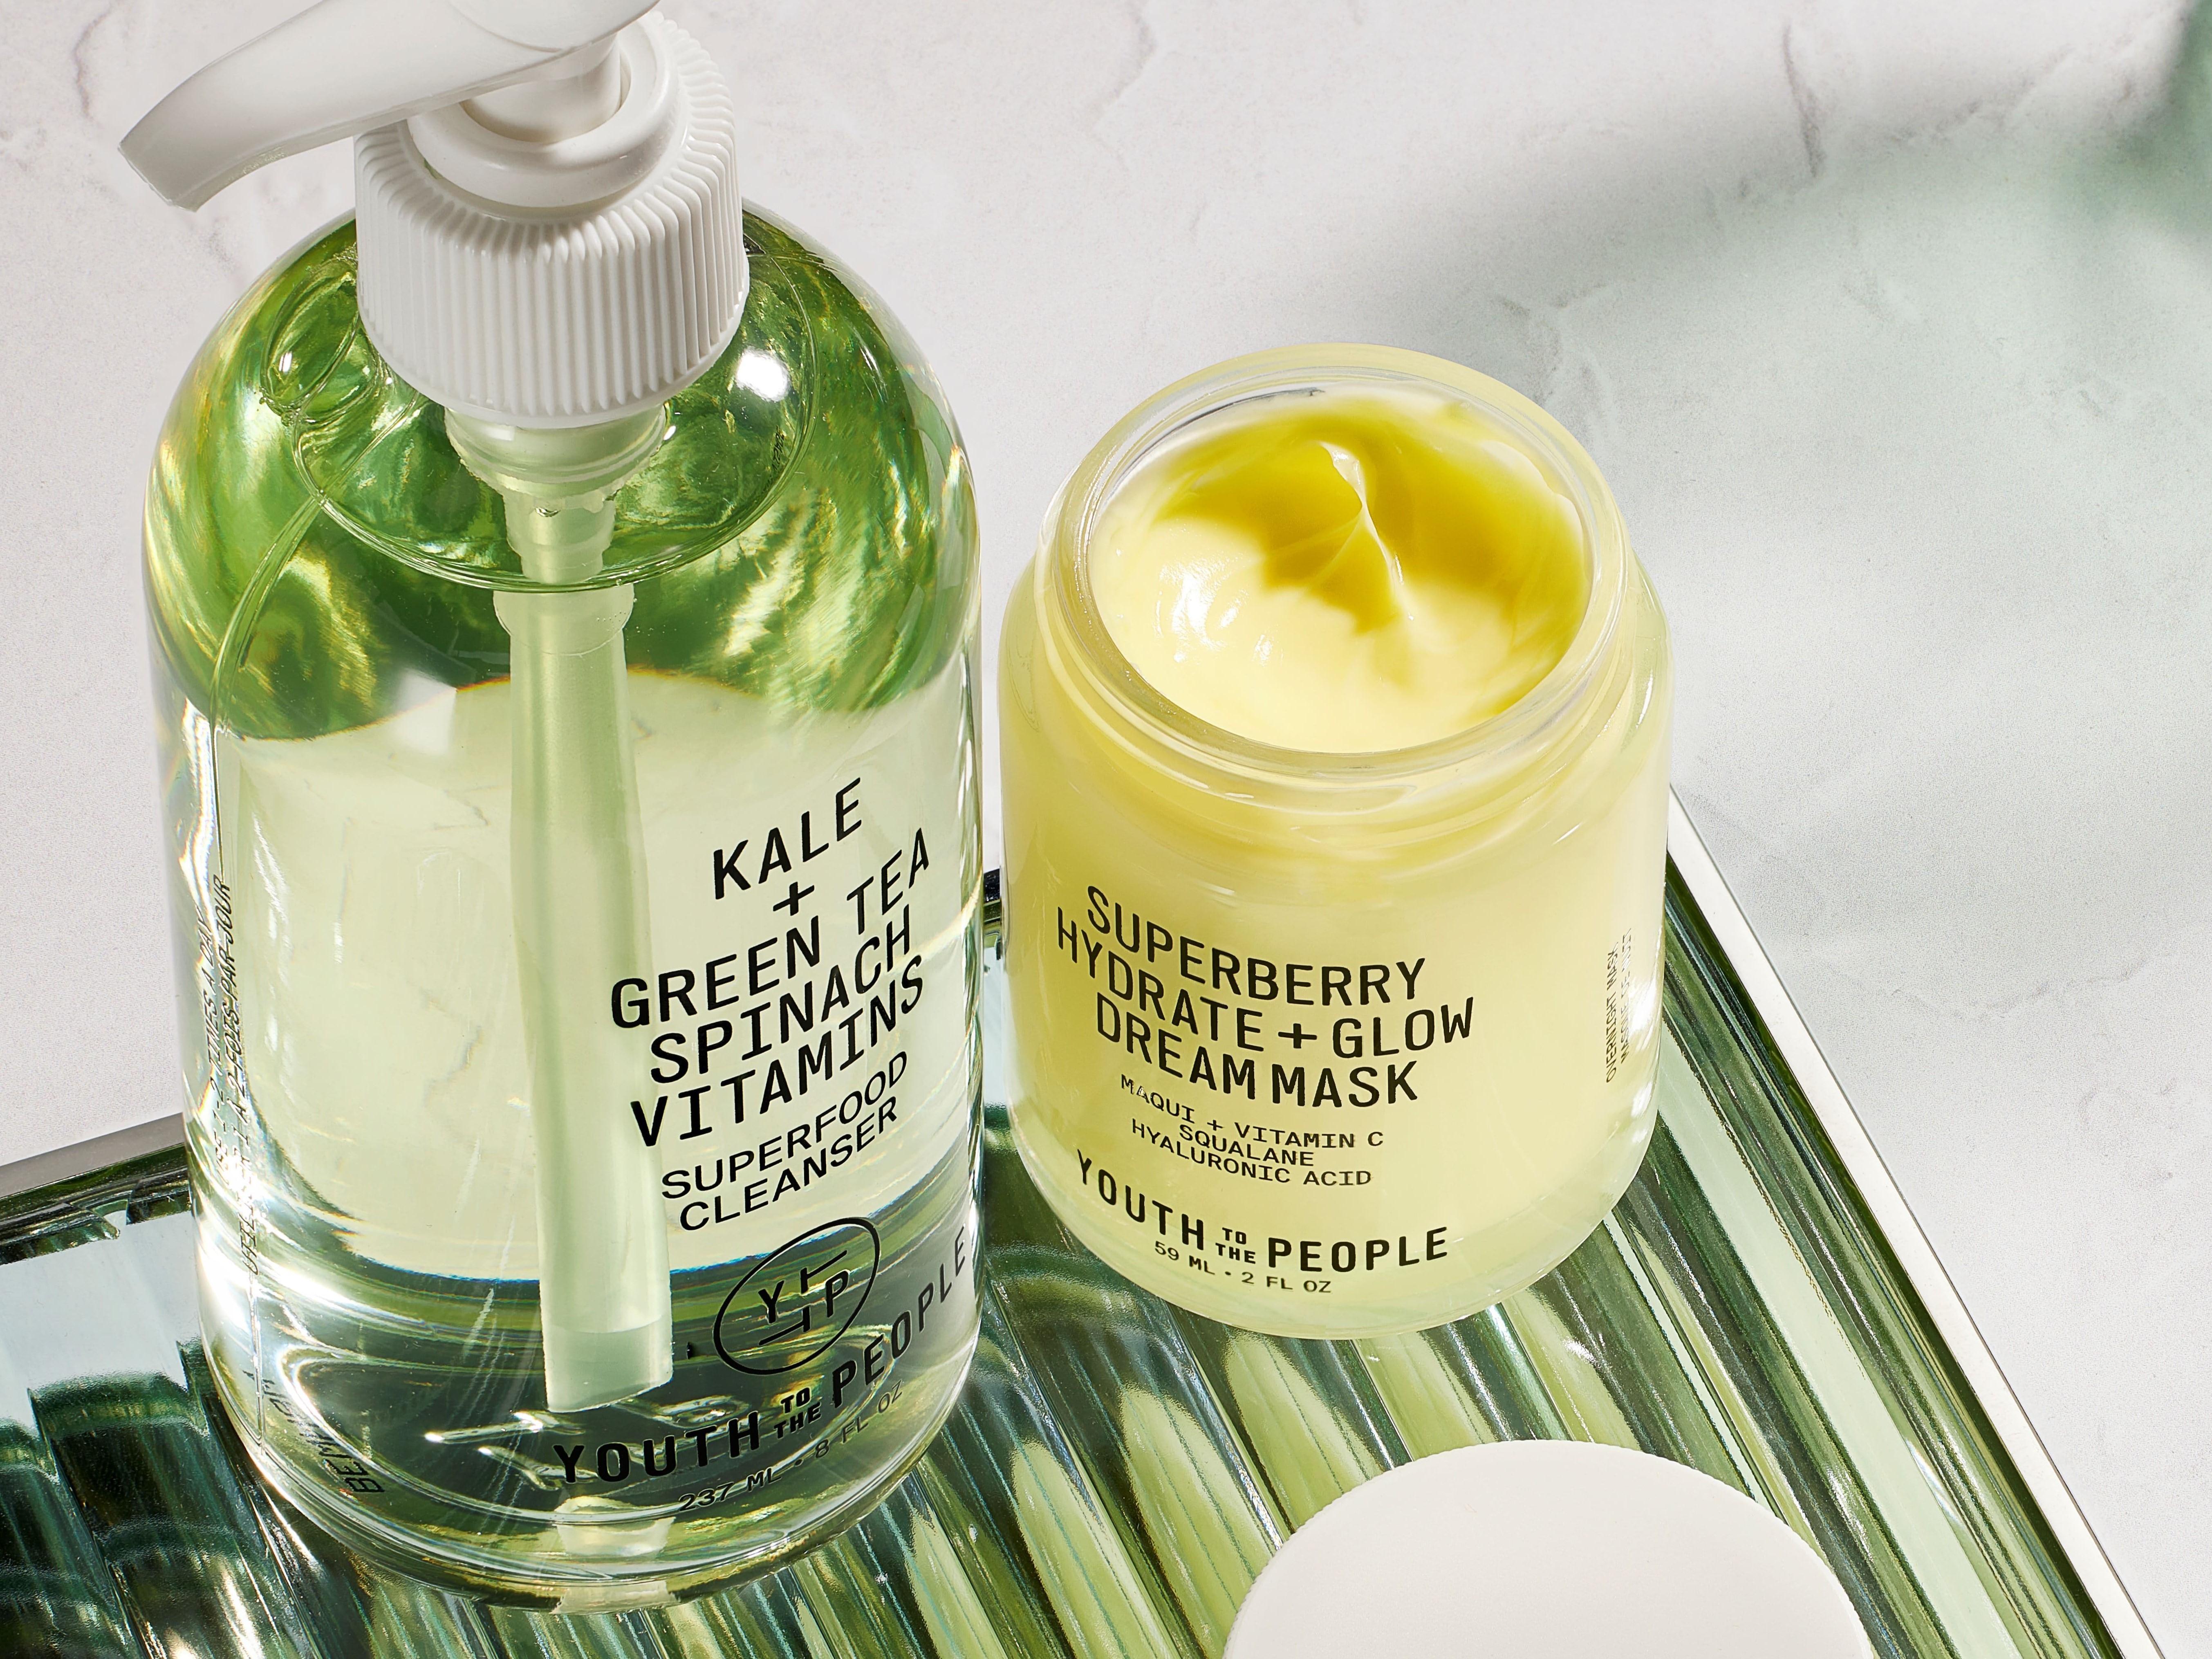 Best Youth To The People products | Space NK